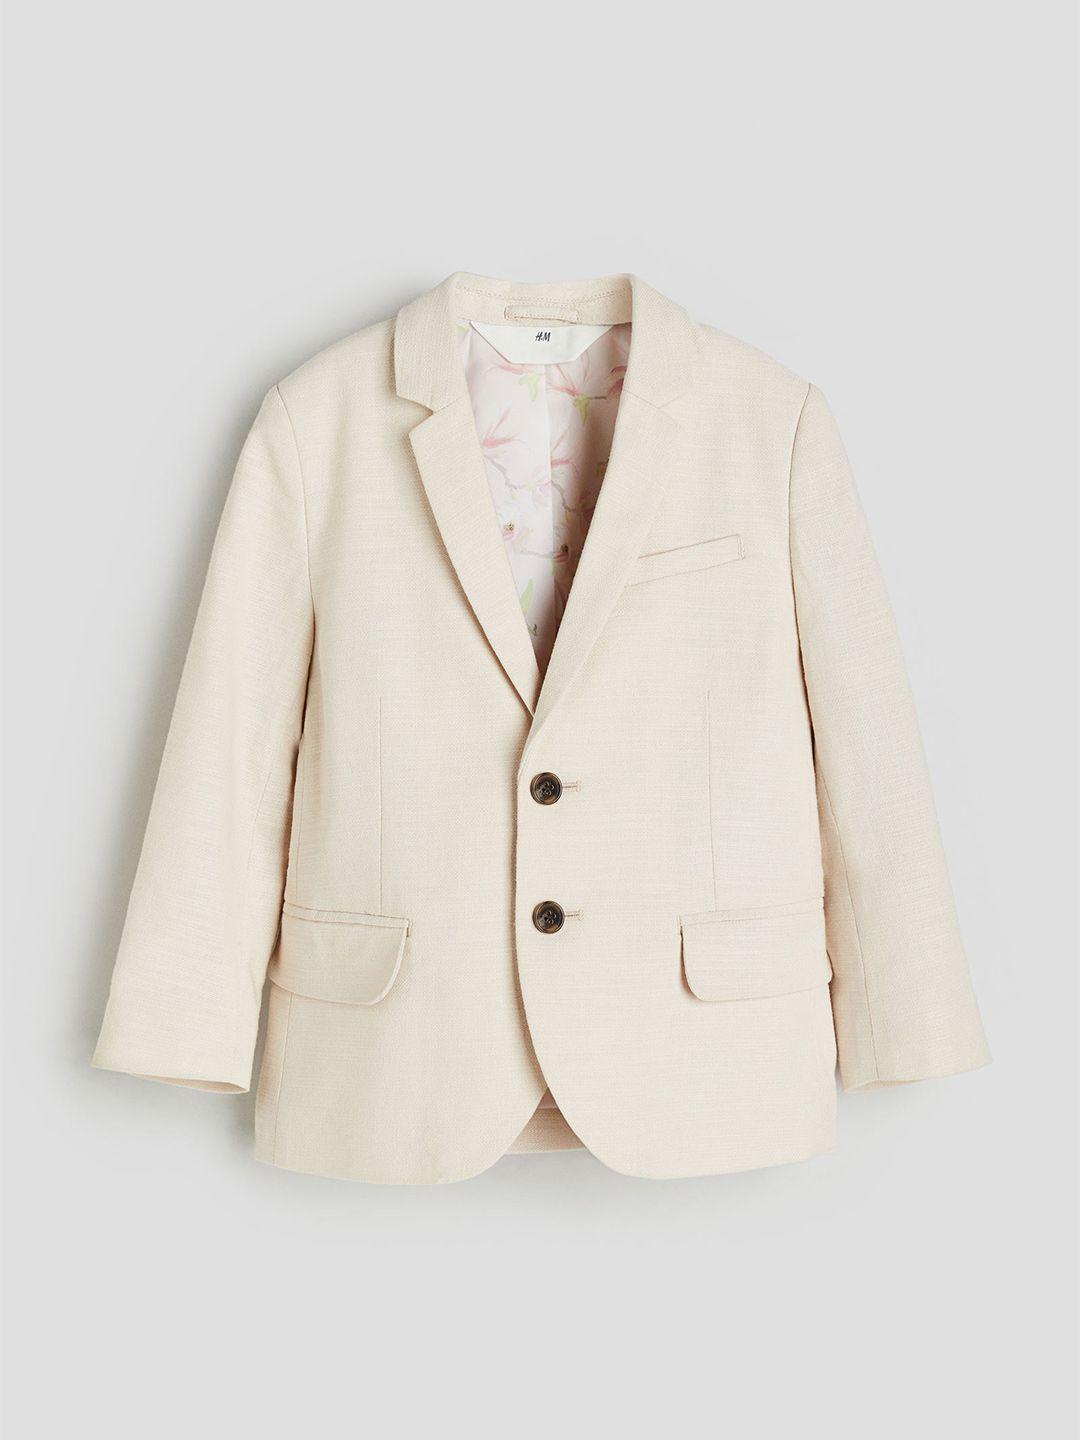 H&M Boys Pure Cotton Single-Breasted Jacket